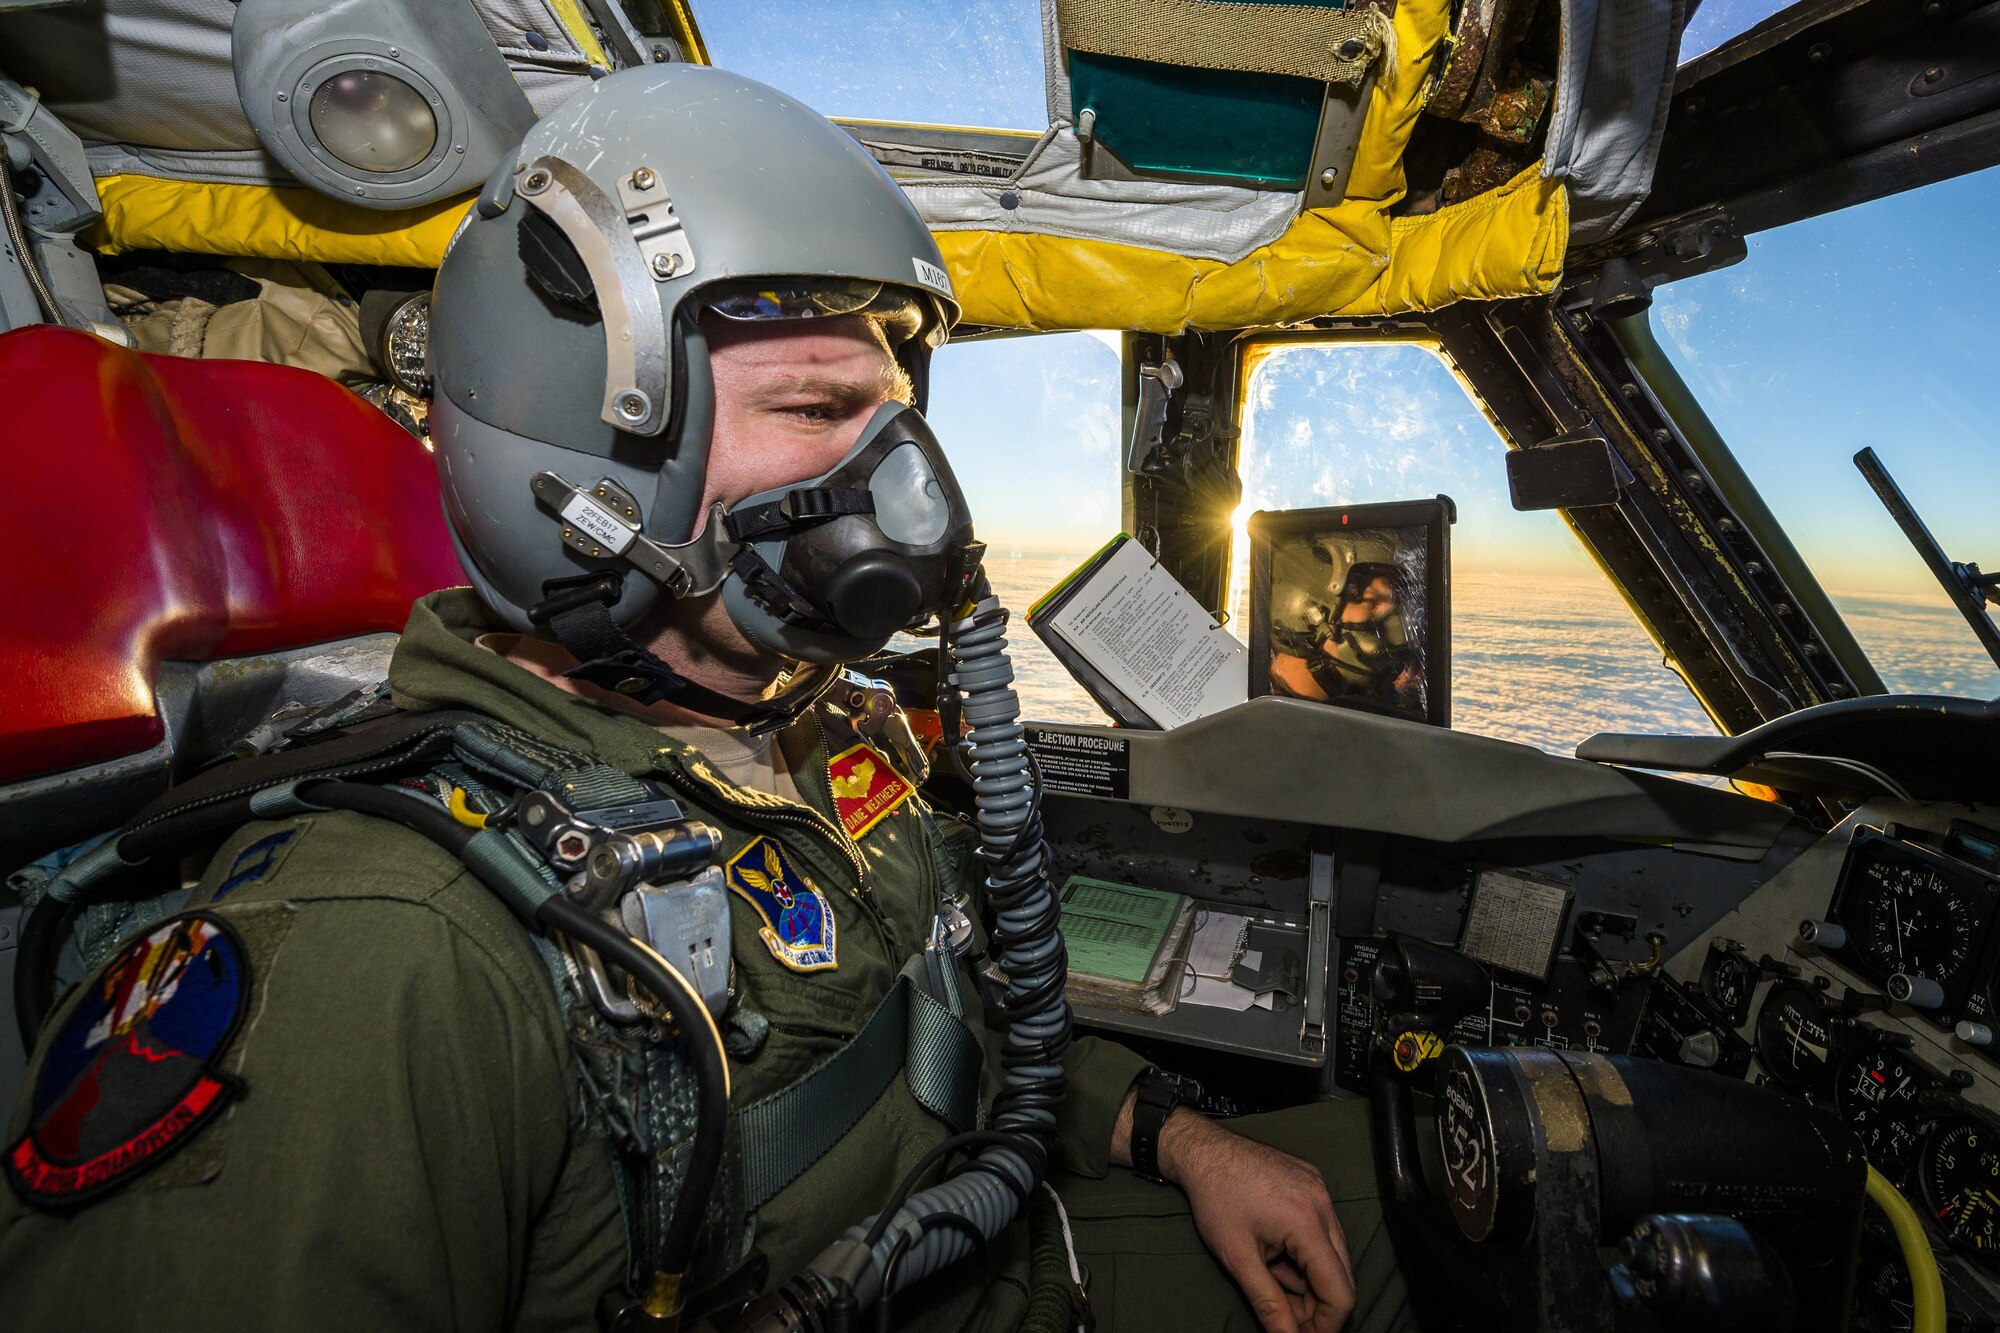 Capt. Dane Weathers, 23rd Bomb Squadron aircraft commander, pilots a B-52H Stratofortress above the clouds in North Dakota airspace, Jan. 31, 2017. Weathers and Capt. Jonathan Gabriel, 23rd BS aircraft commander, relied on their offensive and defensive team to successfully complete their training mission. (U.S. Air Force photo/Senior Airman J.T. Armstrong)